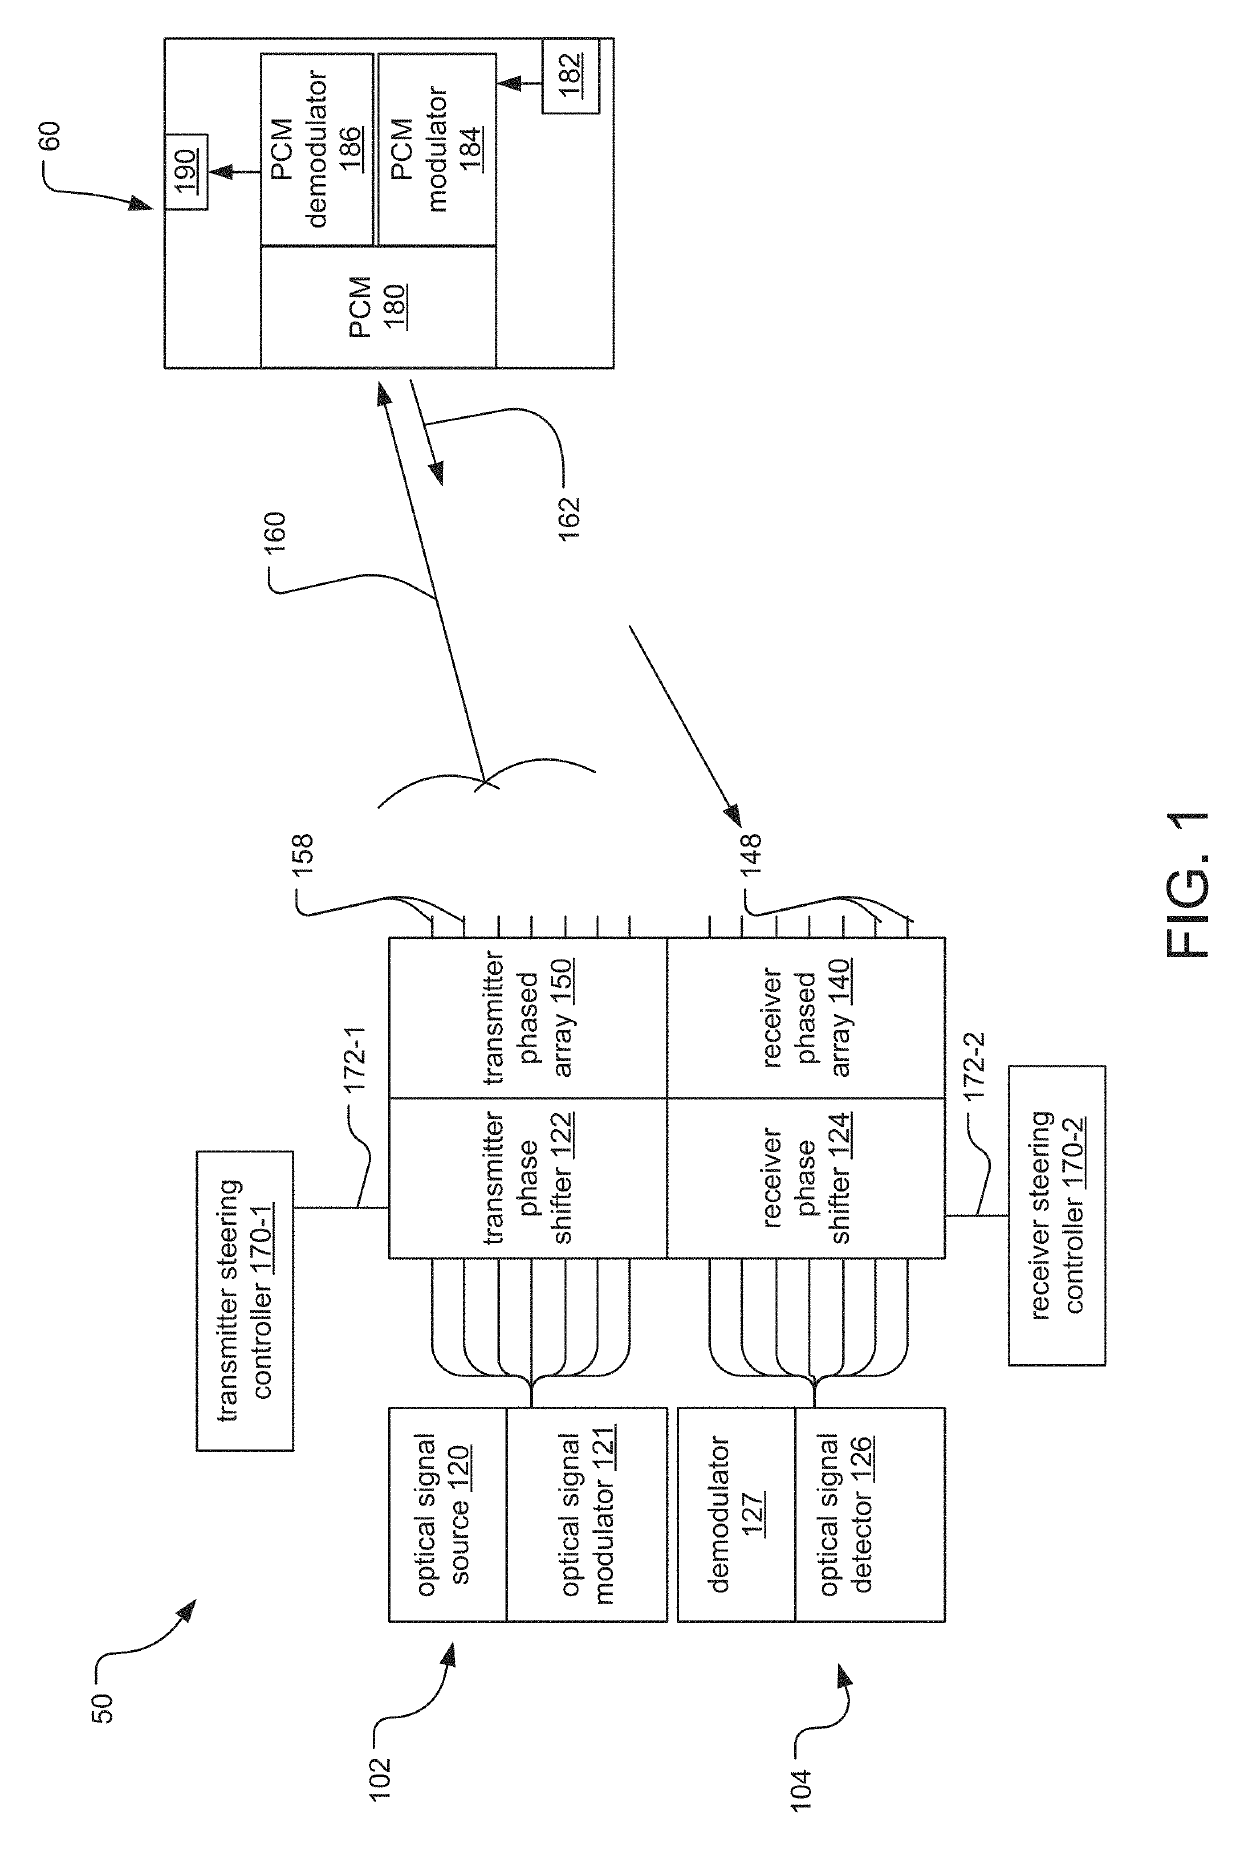 Optical communications system phase-controlled transmitter and phase-conjugate mirror receiver